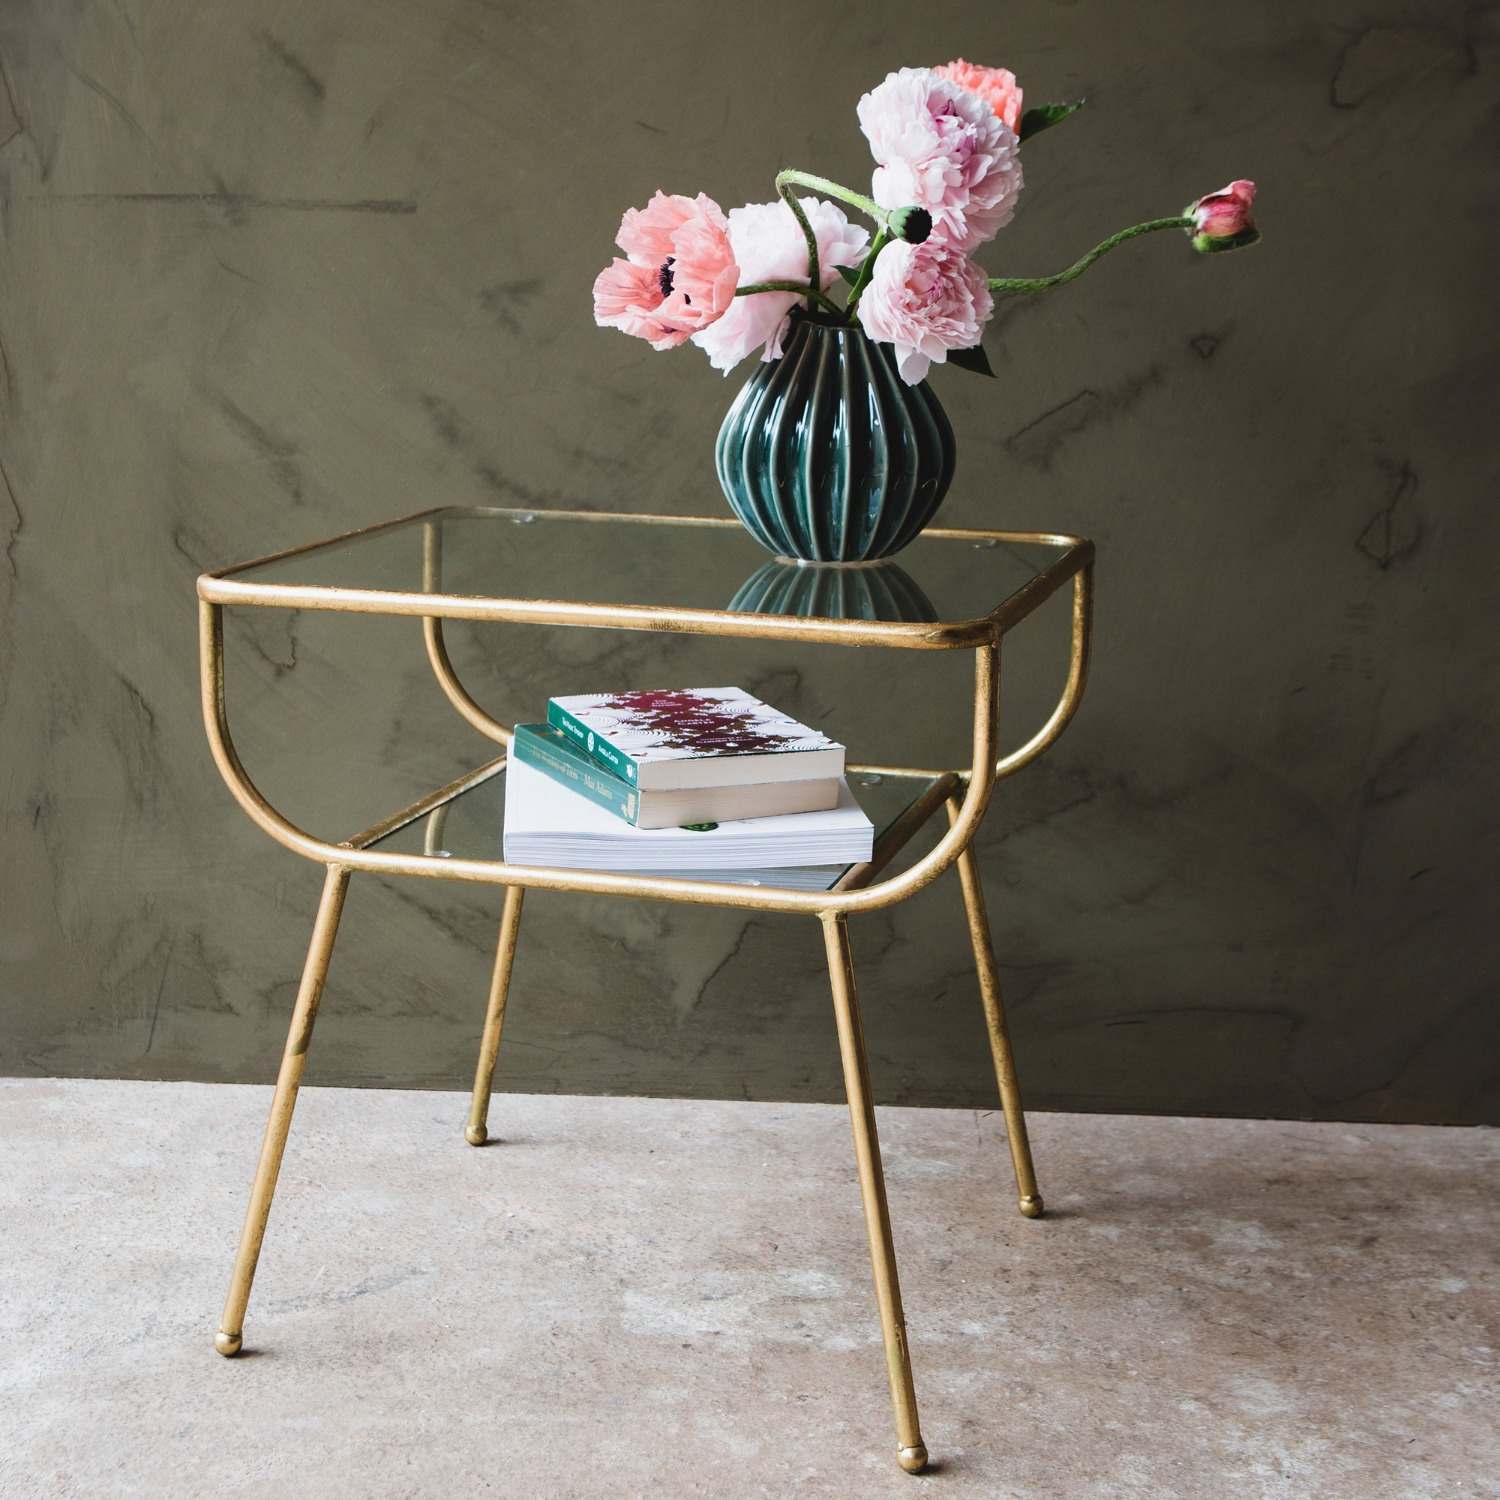 Read more about Graham and green eluminea large gold side table